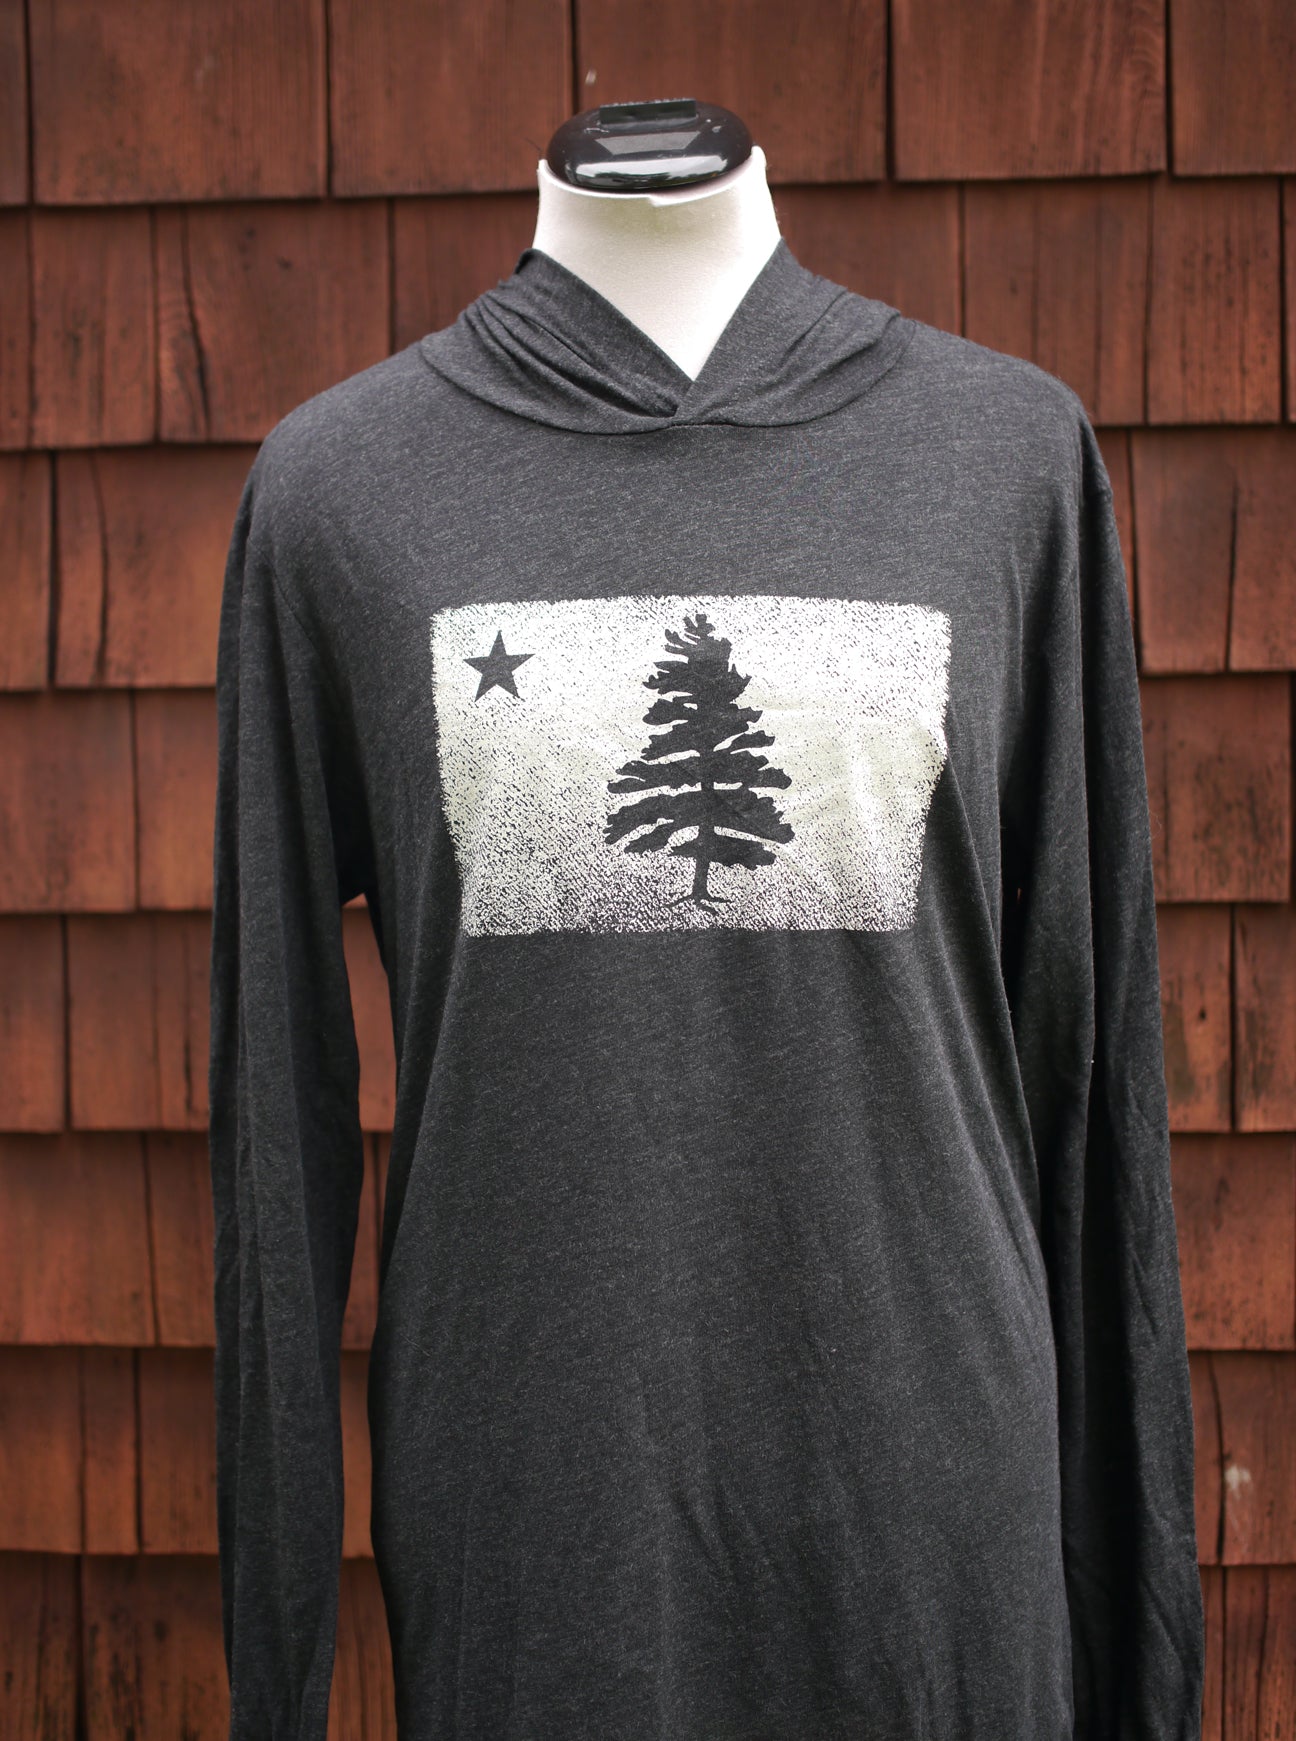 Super soft dark graphite grey long sleeve hoodie t-shirt with 1901 Original Maine Flag distressed and screen printed on the chest